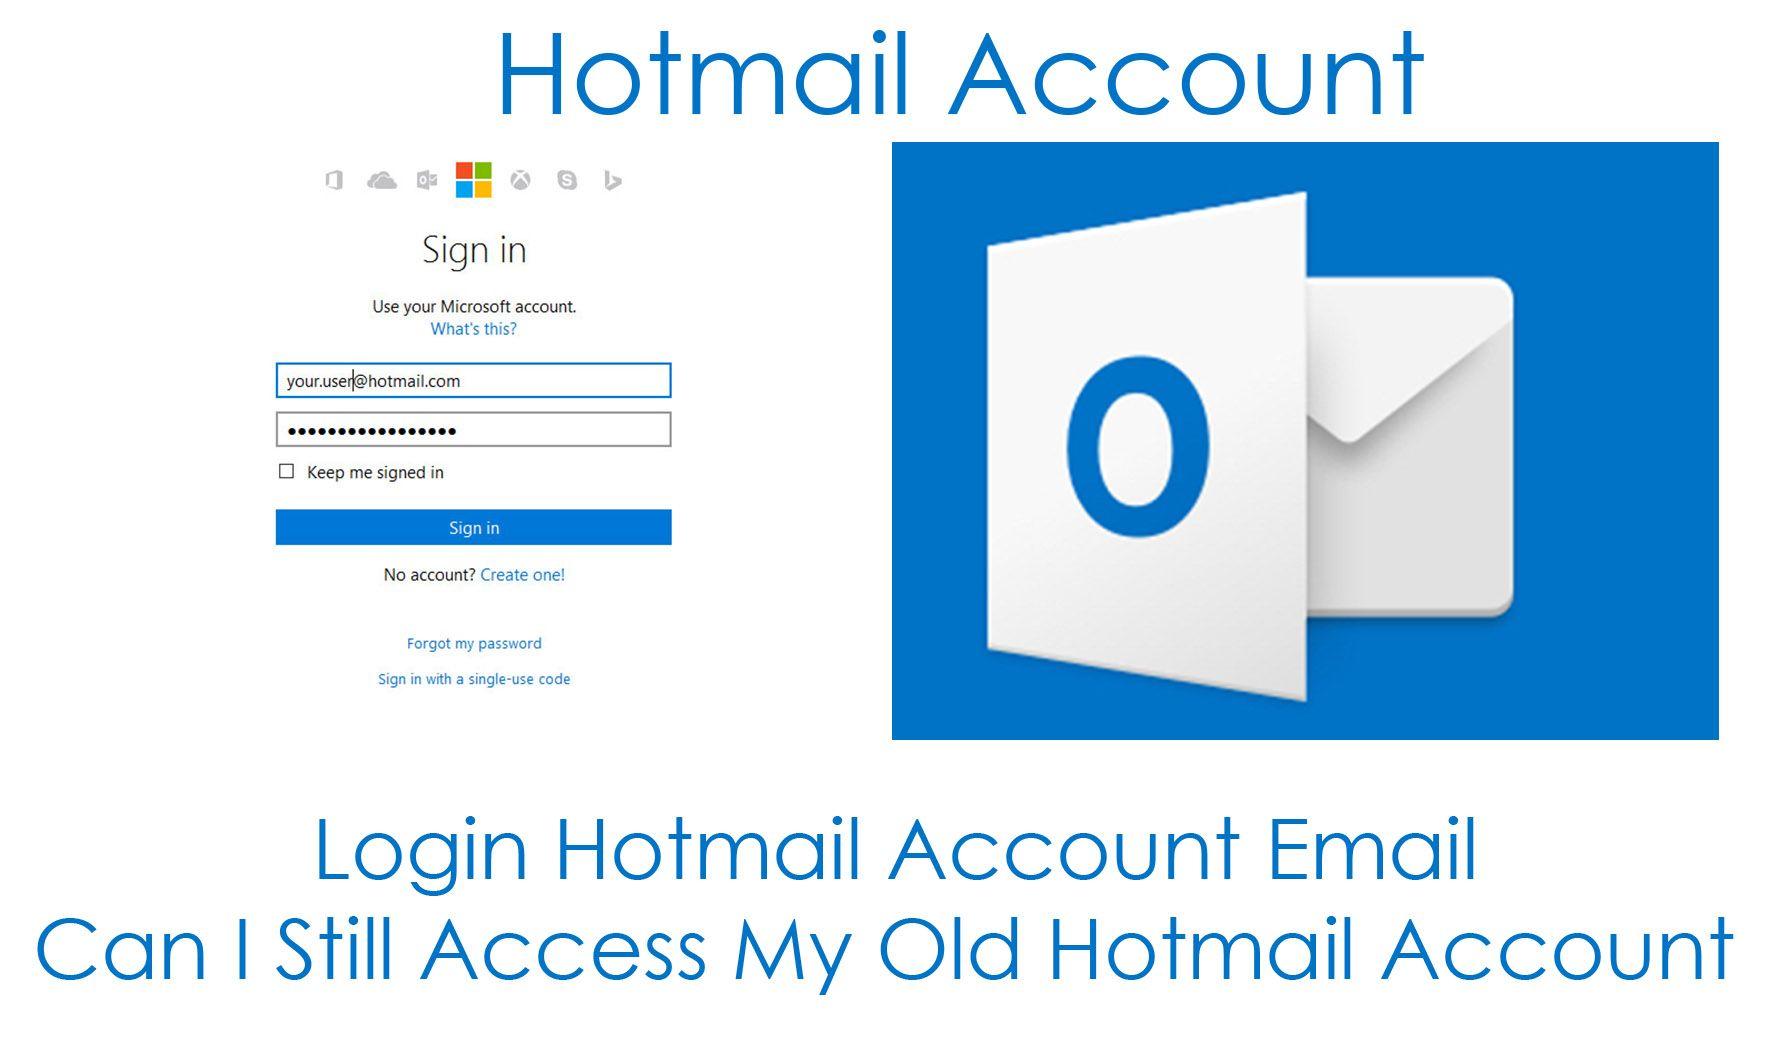 Old Hotmail Logo - Login Hotmail Account Email - Can I Still Access My Old Hotmail ...